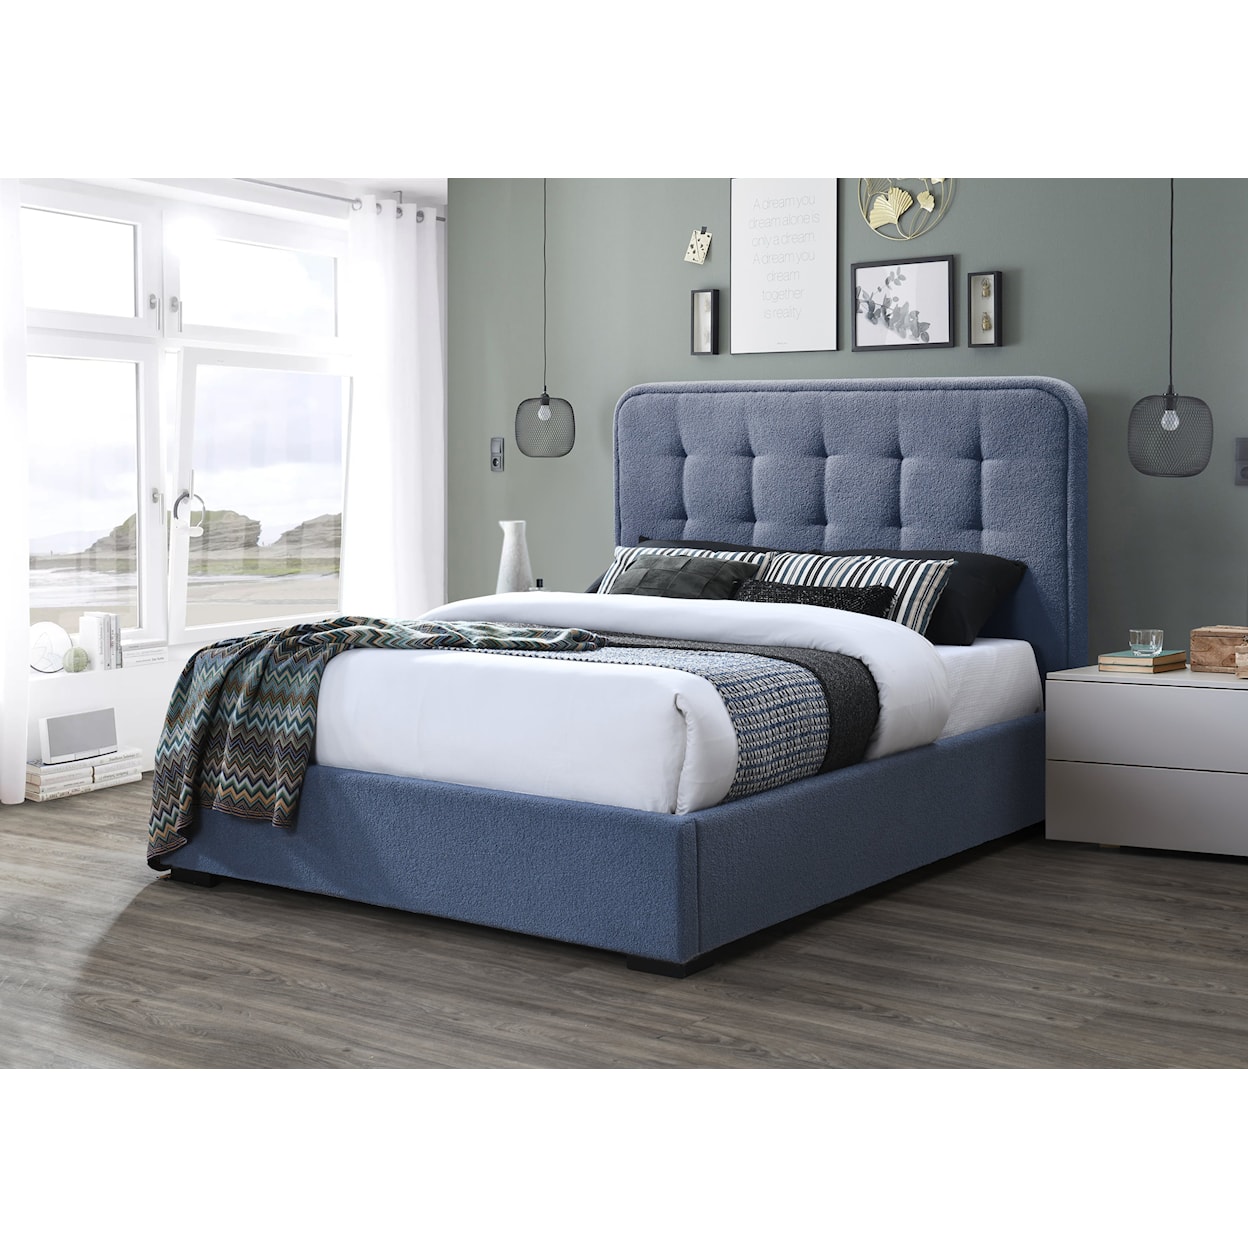 Lifestyle 9434A Upholstered Bed - Full